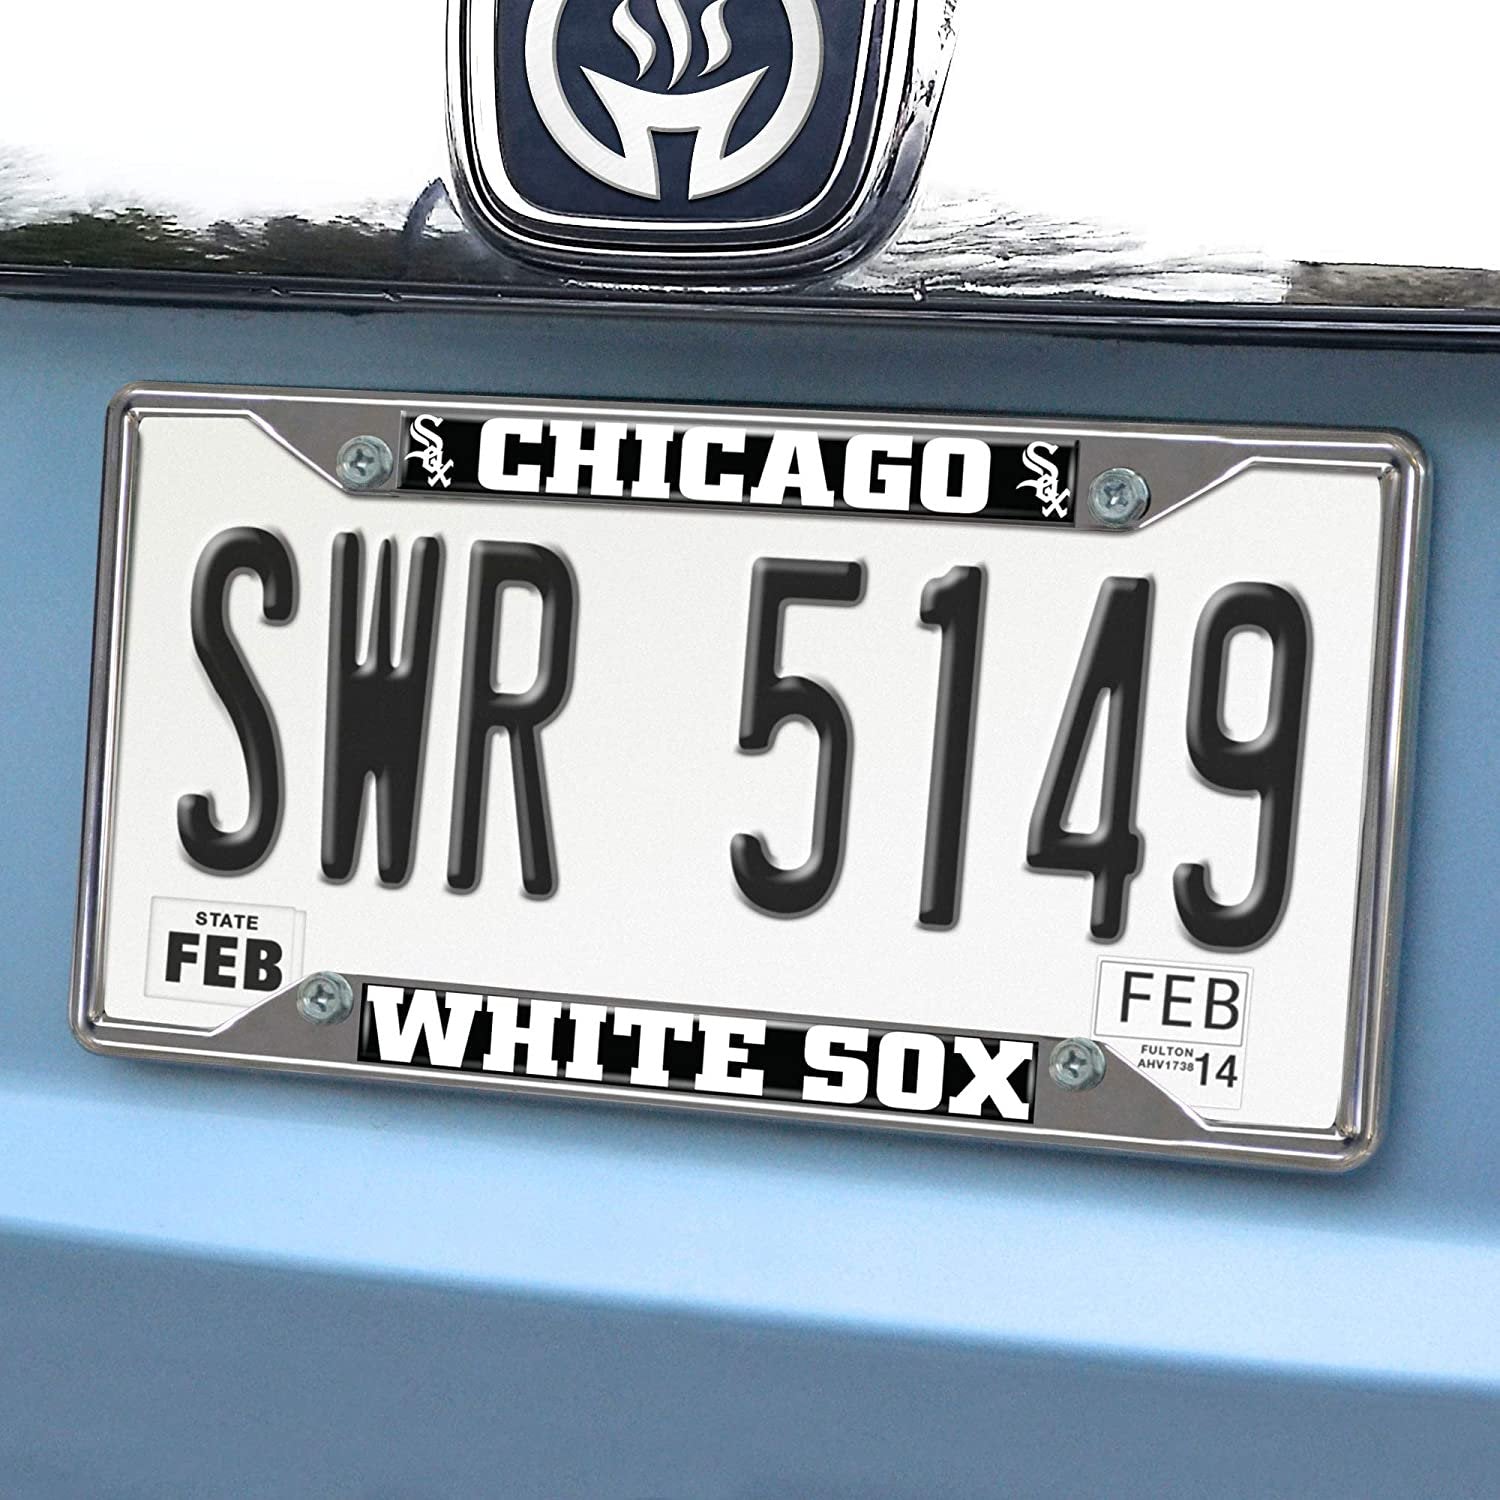 Chicago White Sox Metal License Plate Frame Tag Cover Chrome 6x12 Inch